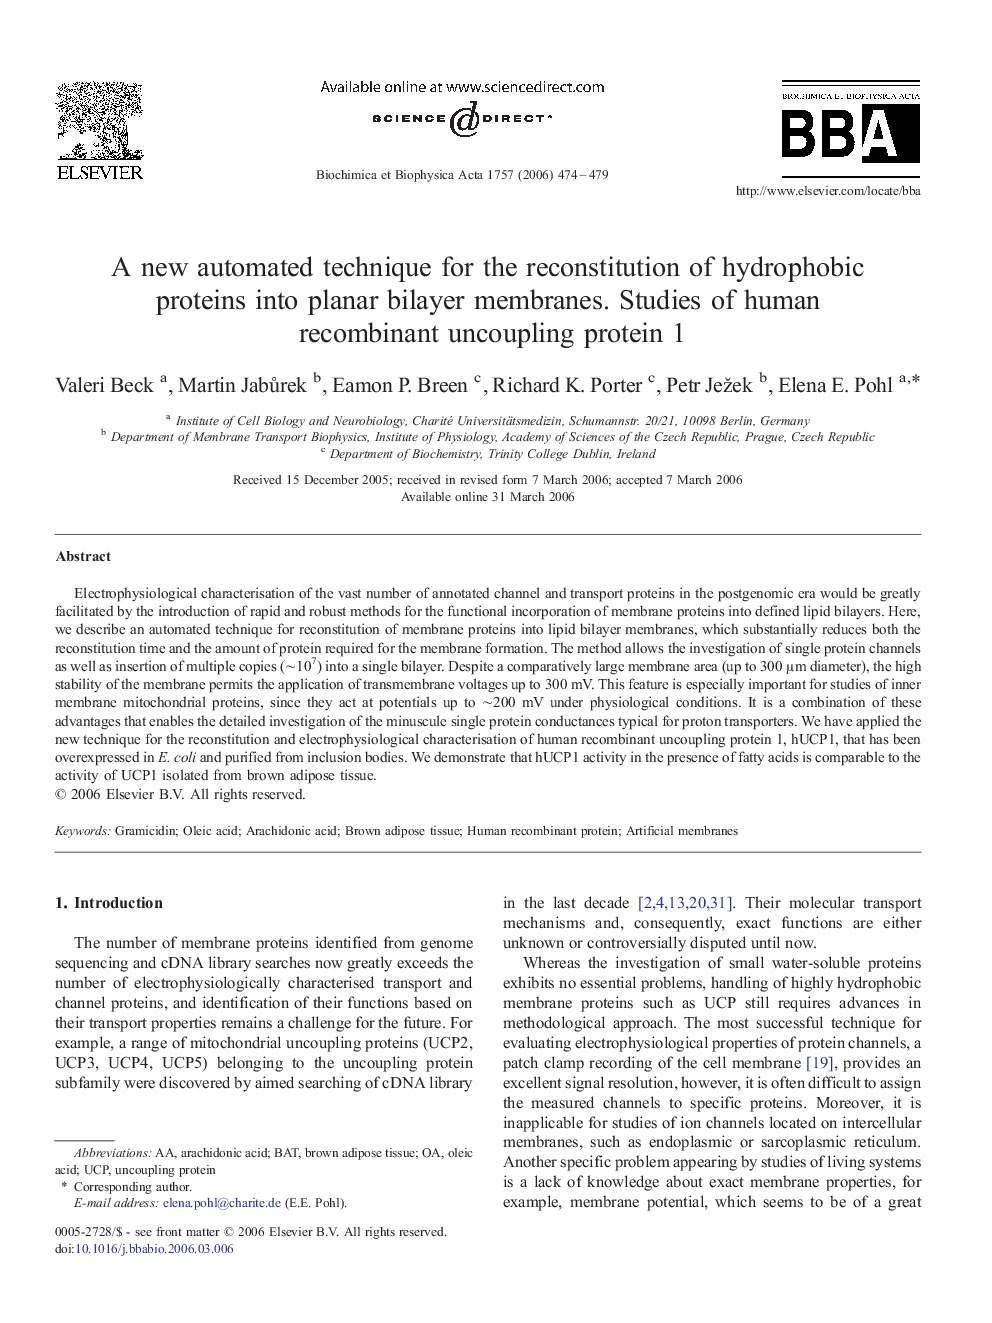 A new automated technique for the reconstitution of hydrophobic proteins into planar bilayer membranes. Studies of human recombinant uncoupling protein 1